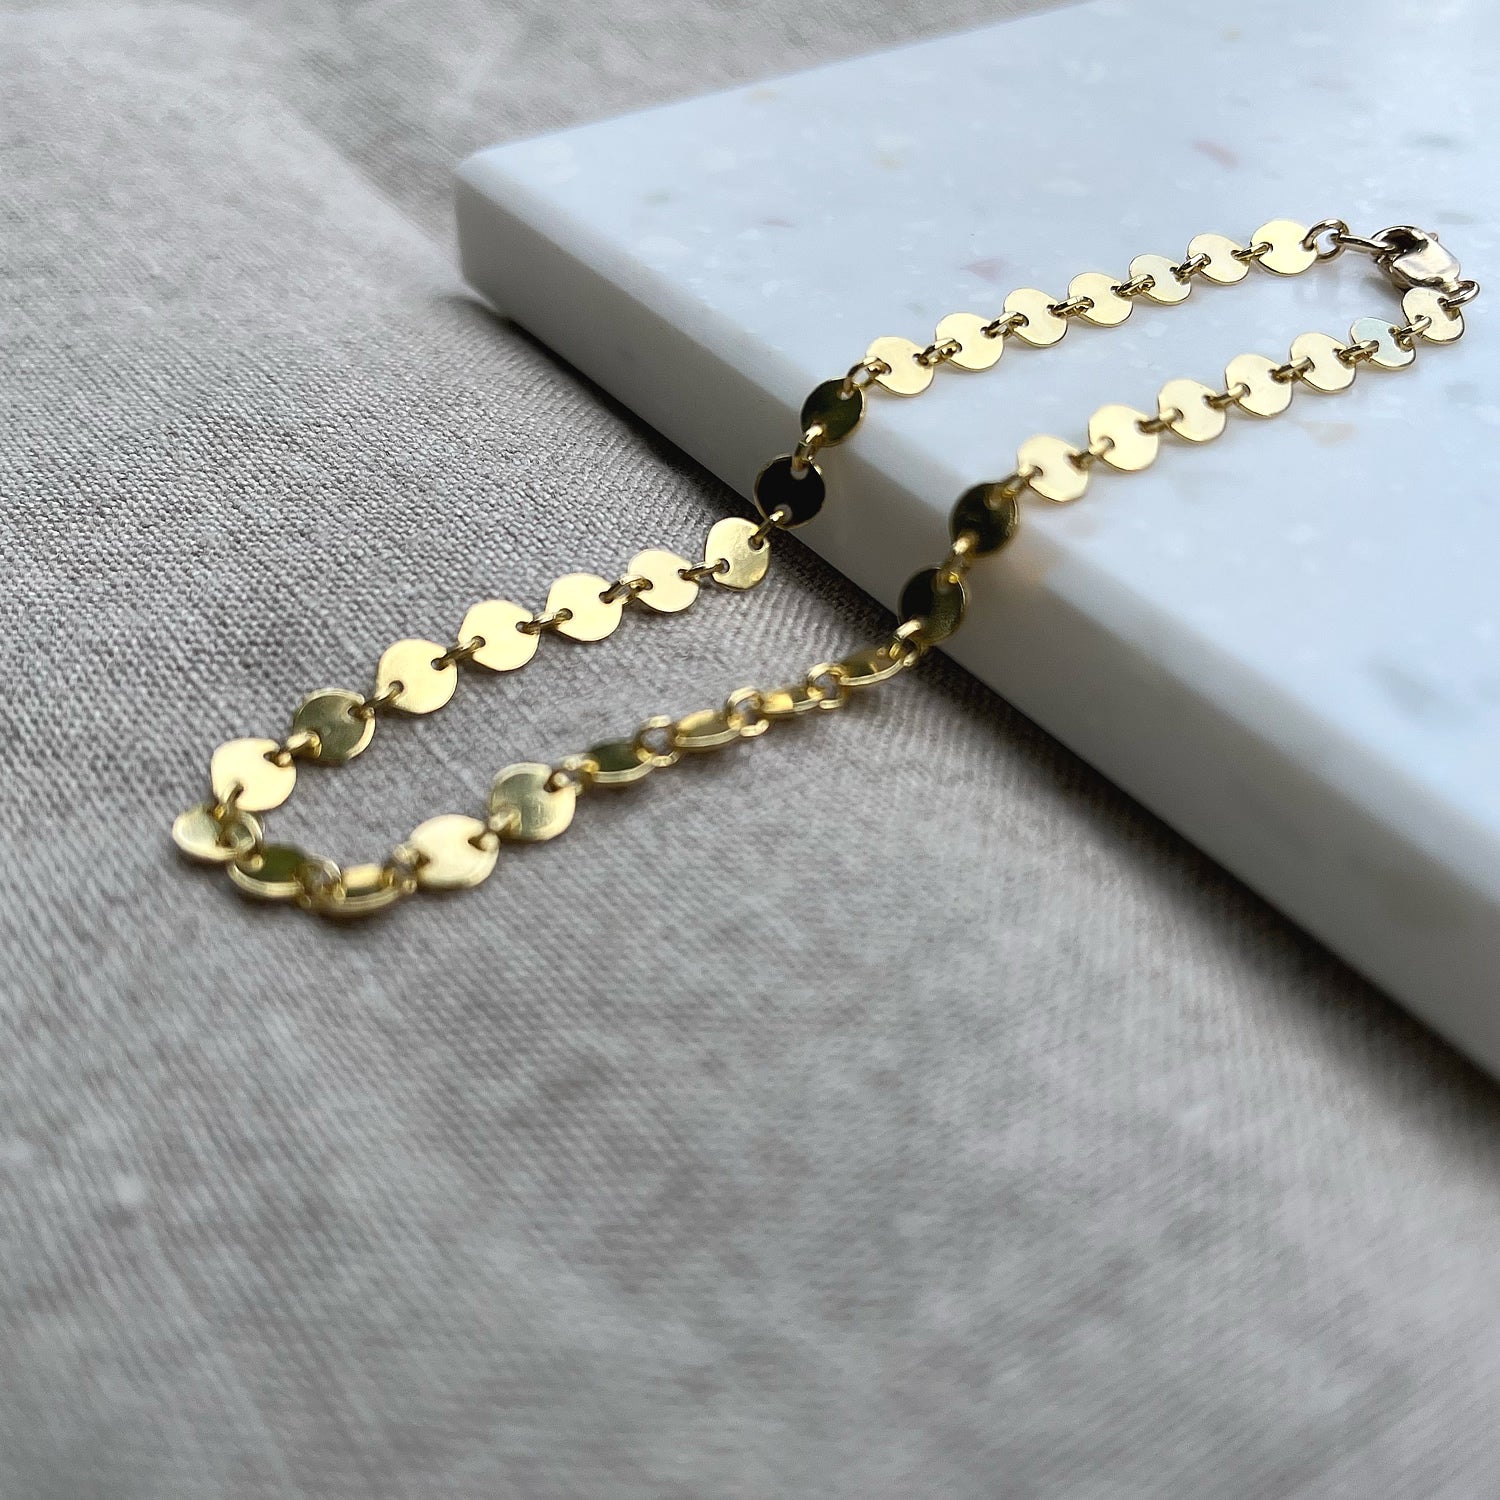 14k gold fill coin chain bracelet on a tile with a linen background